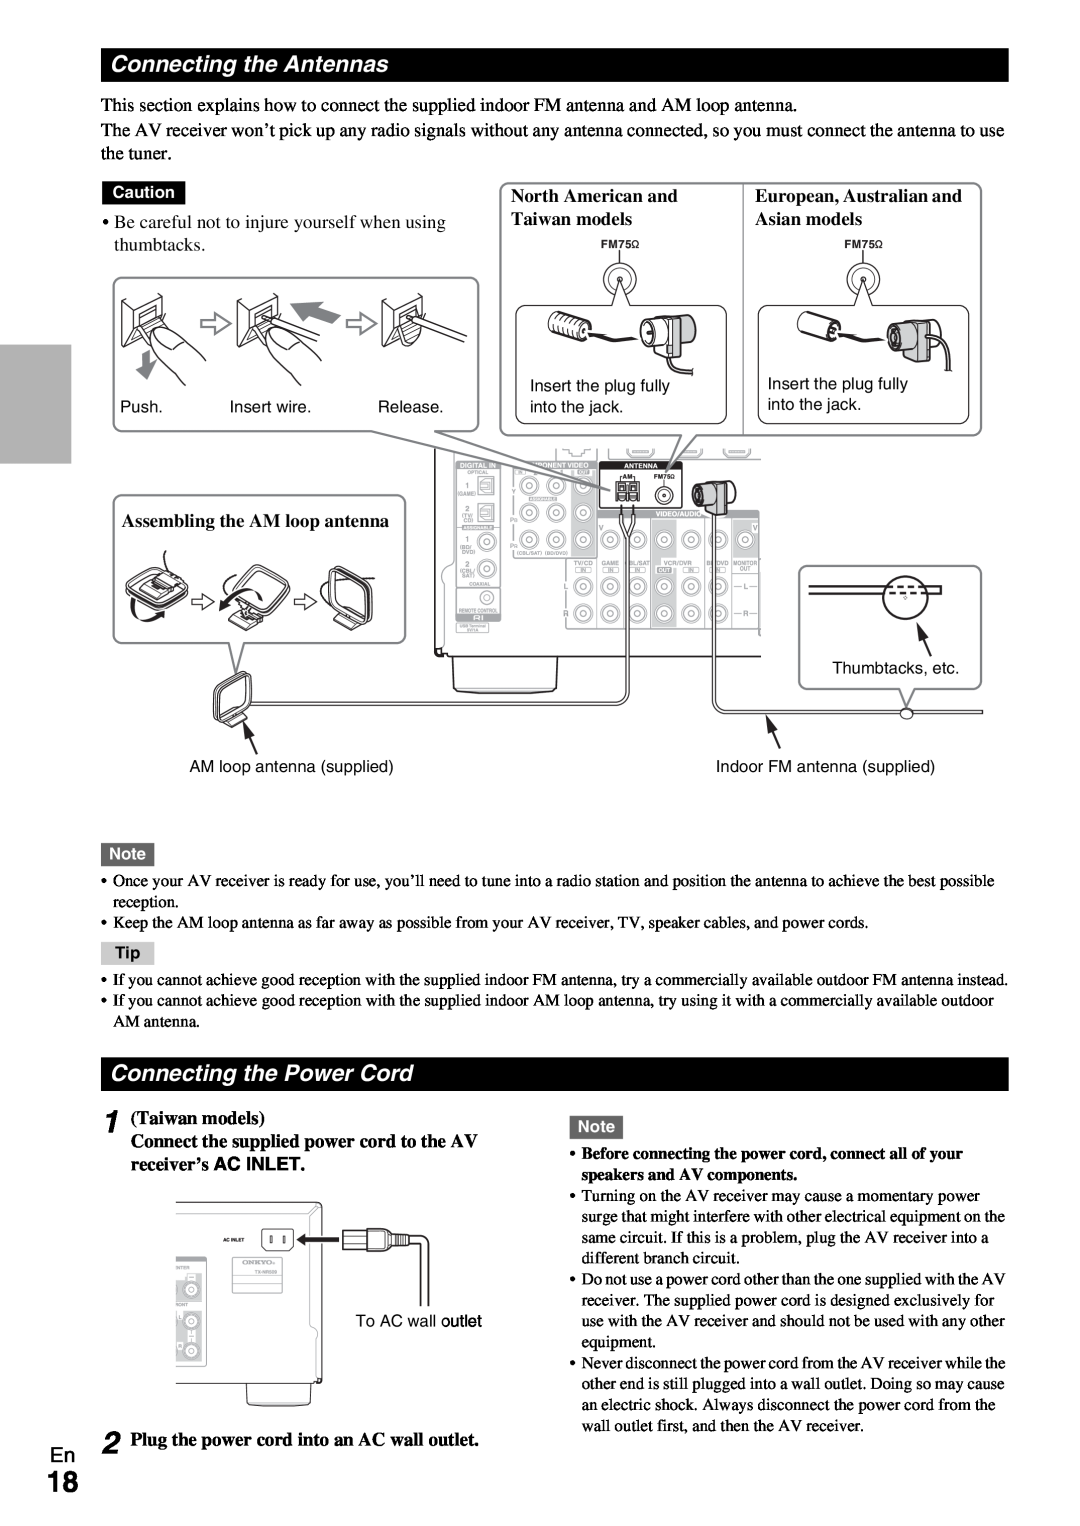 Onkyo TX-NR509 instruction manual Connecting the Antennas, Connecting the Power Cord 